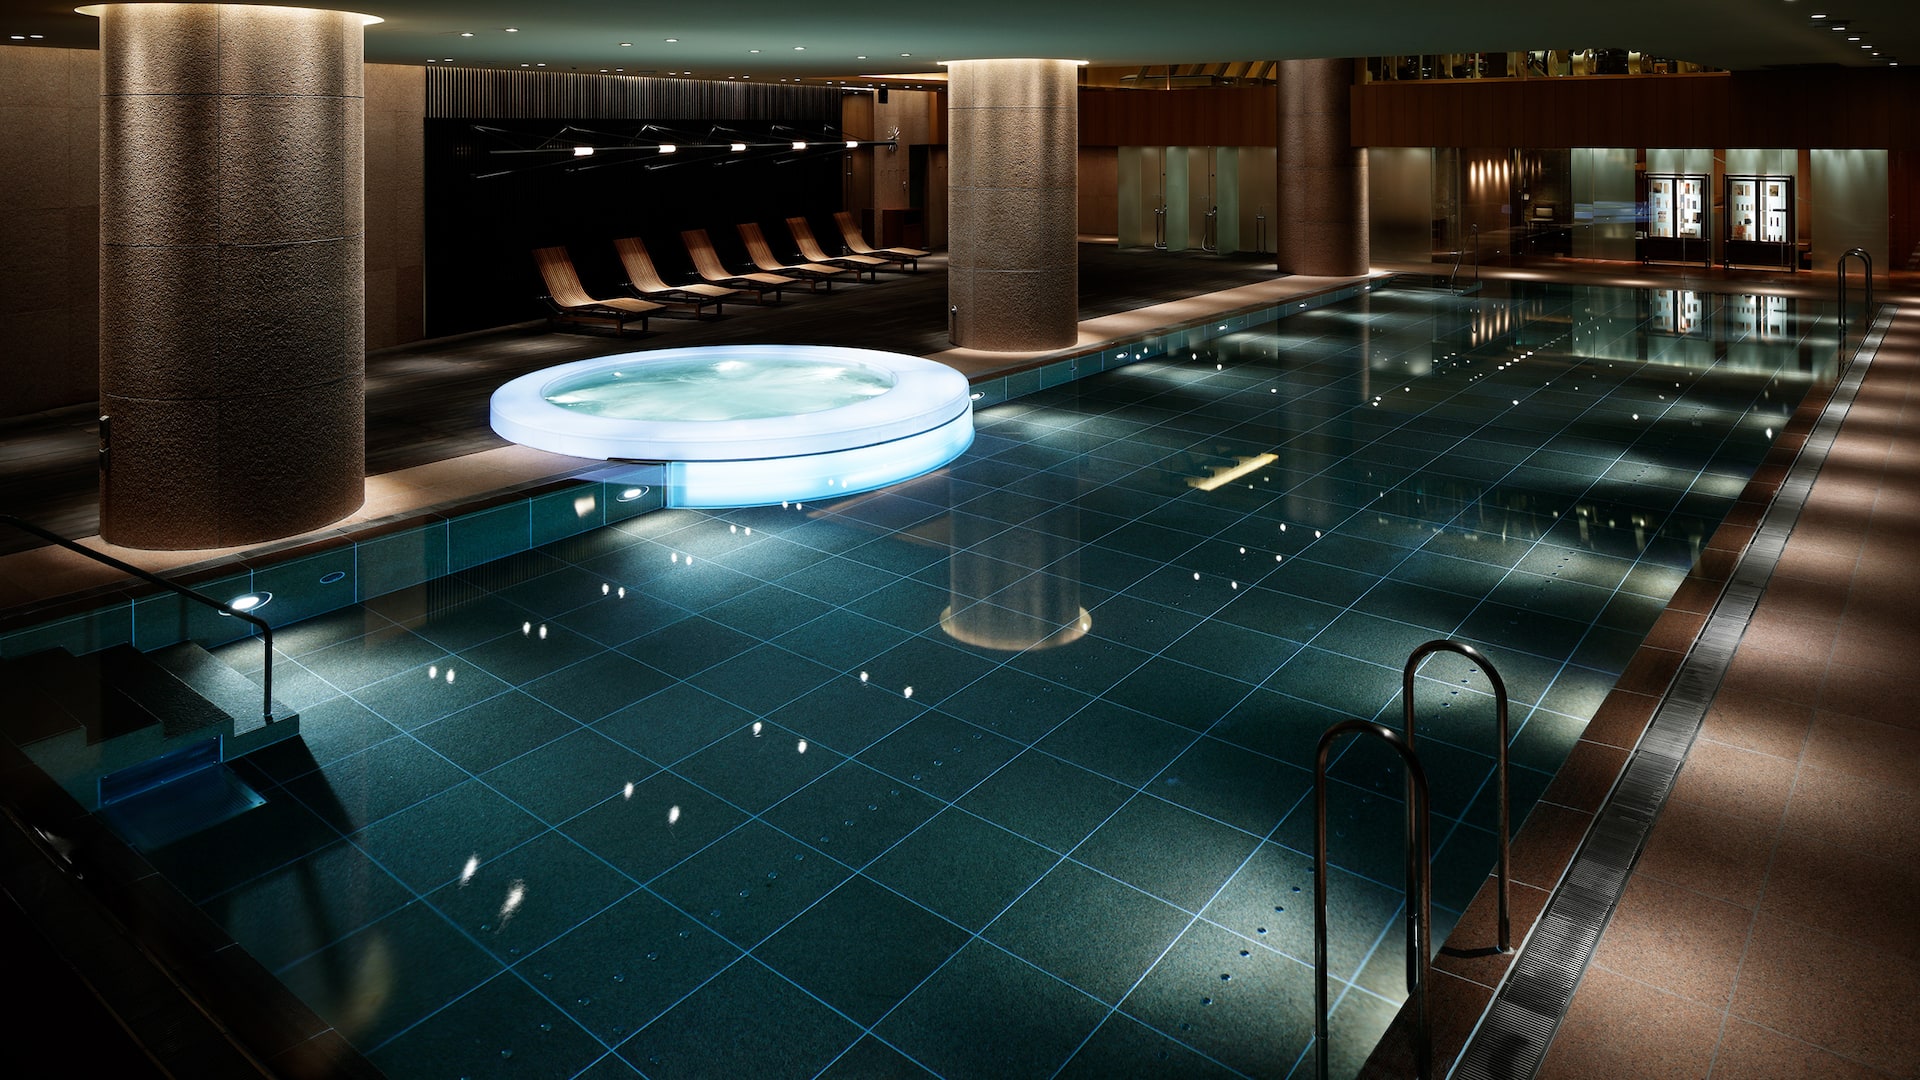  Nagomi Spa And Fitness Jetted Tub - Grand Hyatt Tokyo